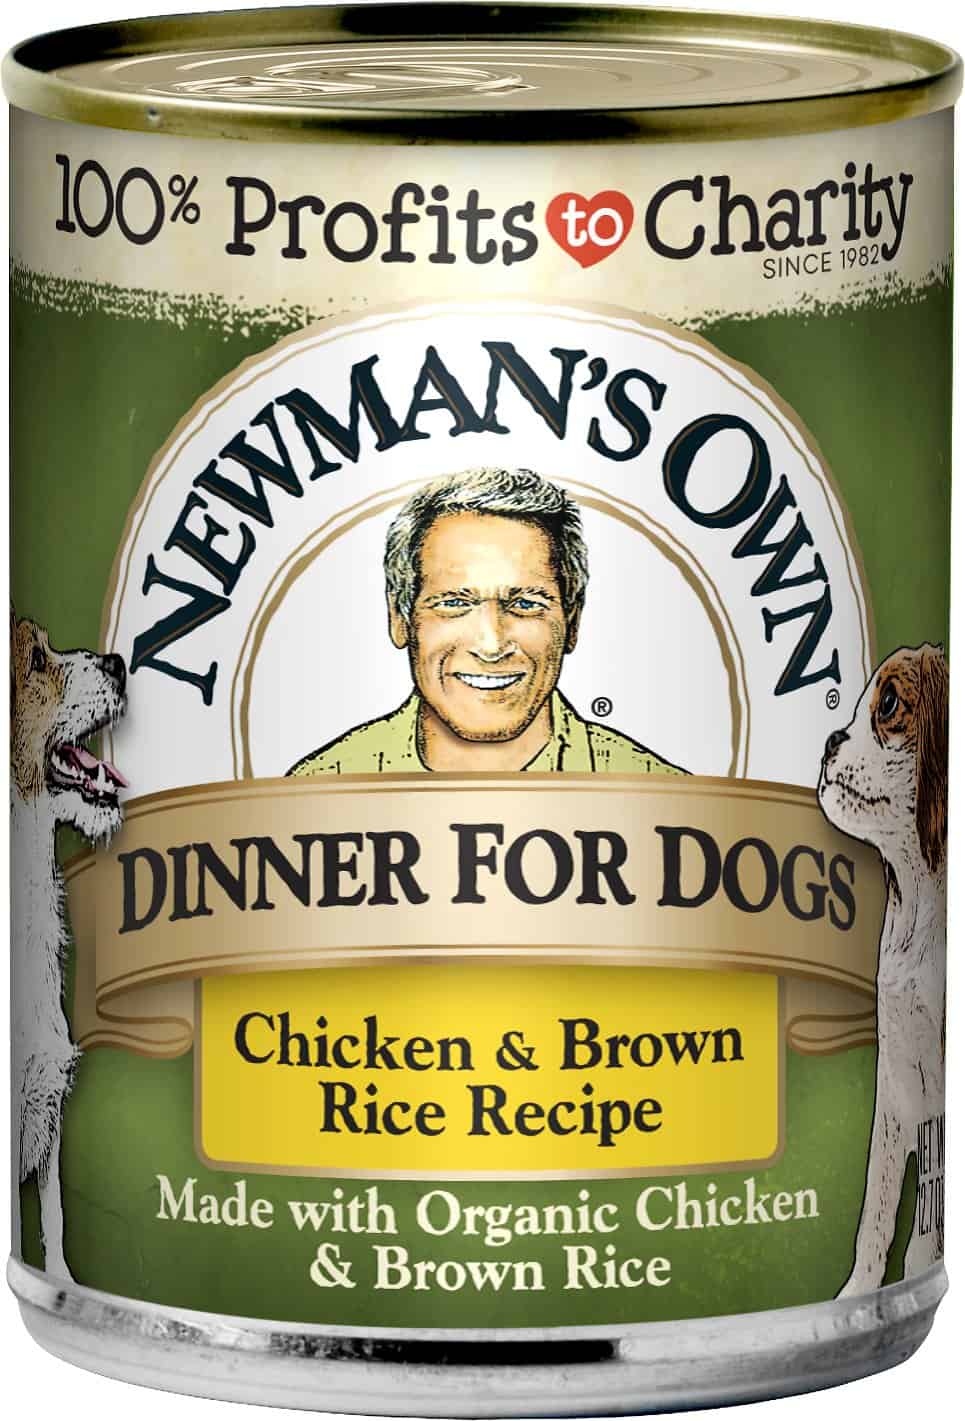 Newman's Own Dinner for Dogs